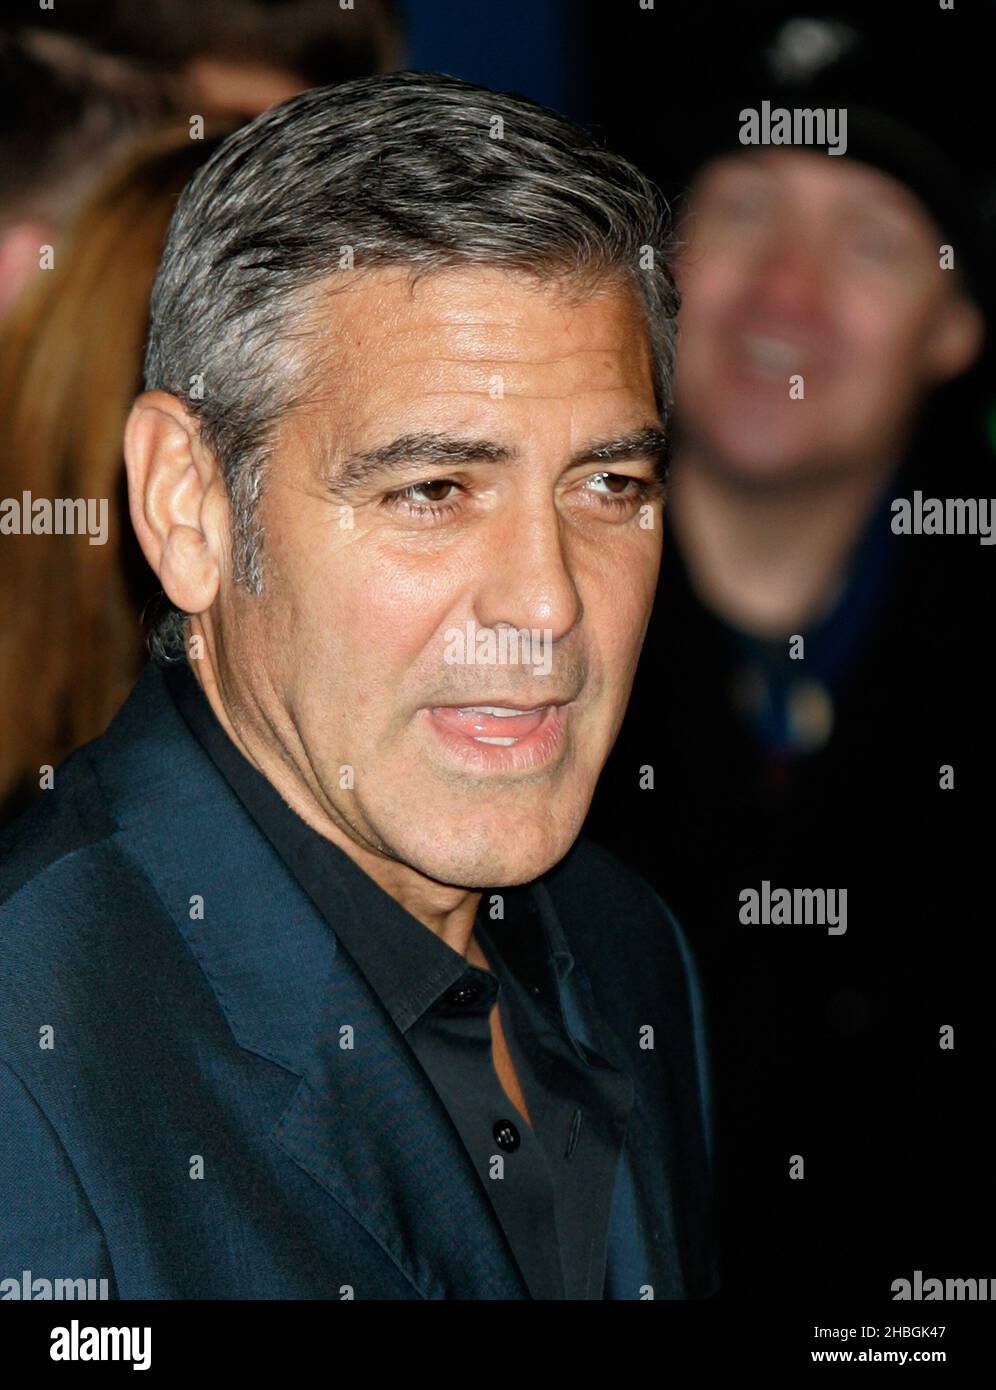 George Clooney arrives at the at the premiere for 'The Ides of March' at the Odeon Leicester Square as part of the 55th BFI London Film Festival. Stock Photo